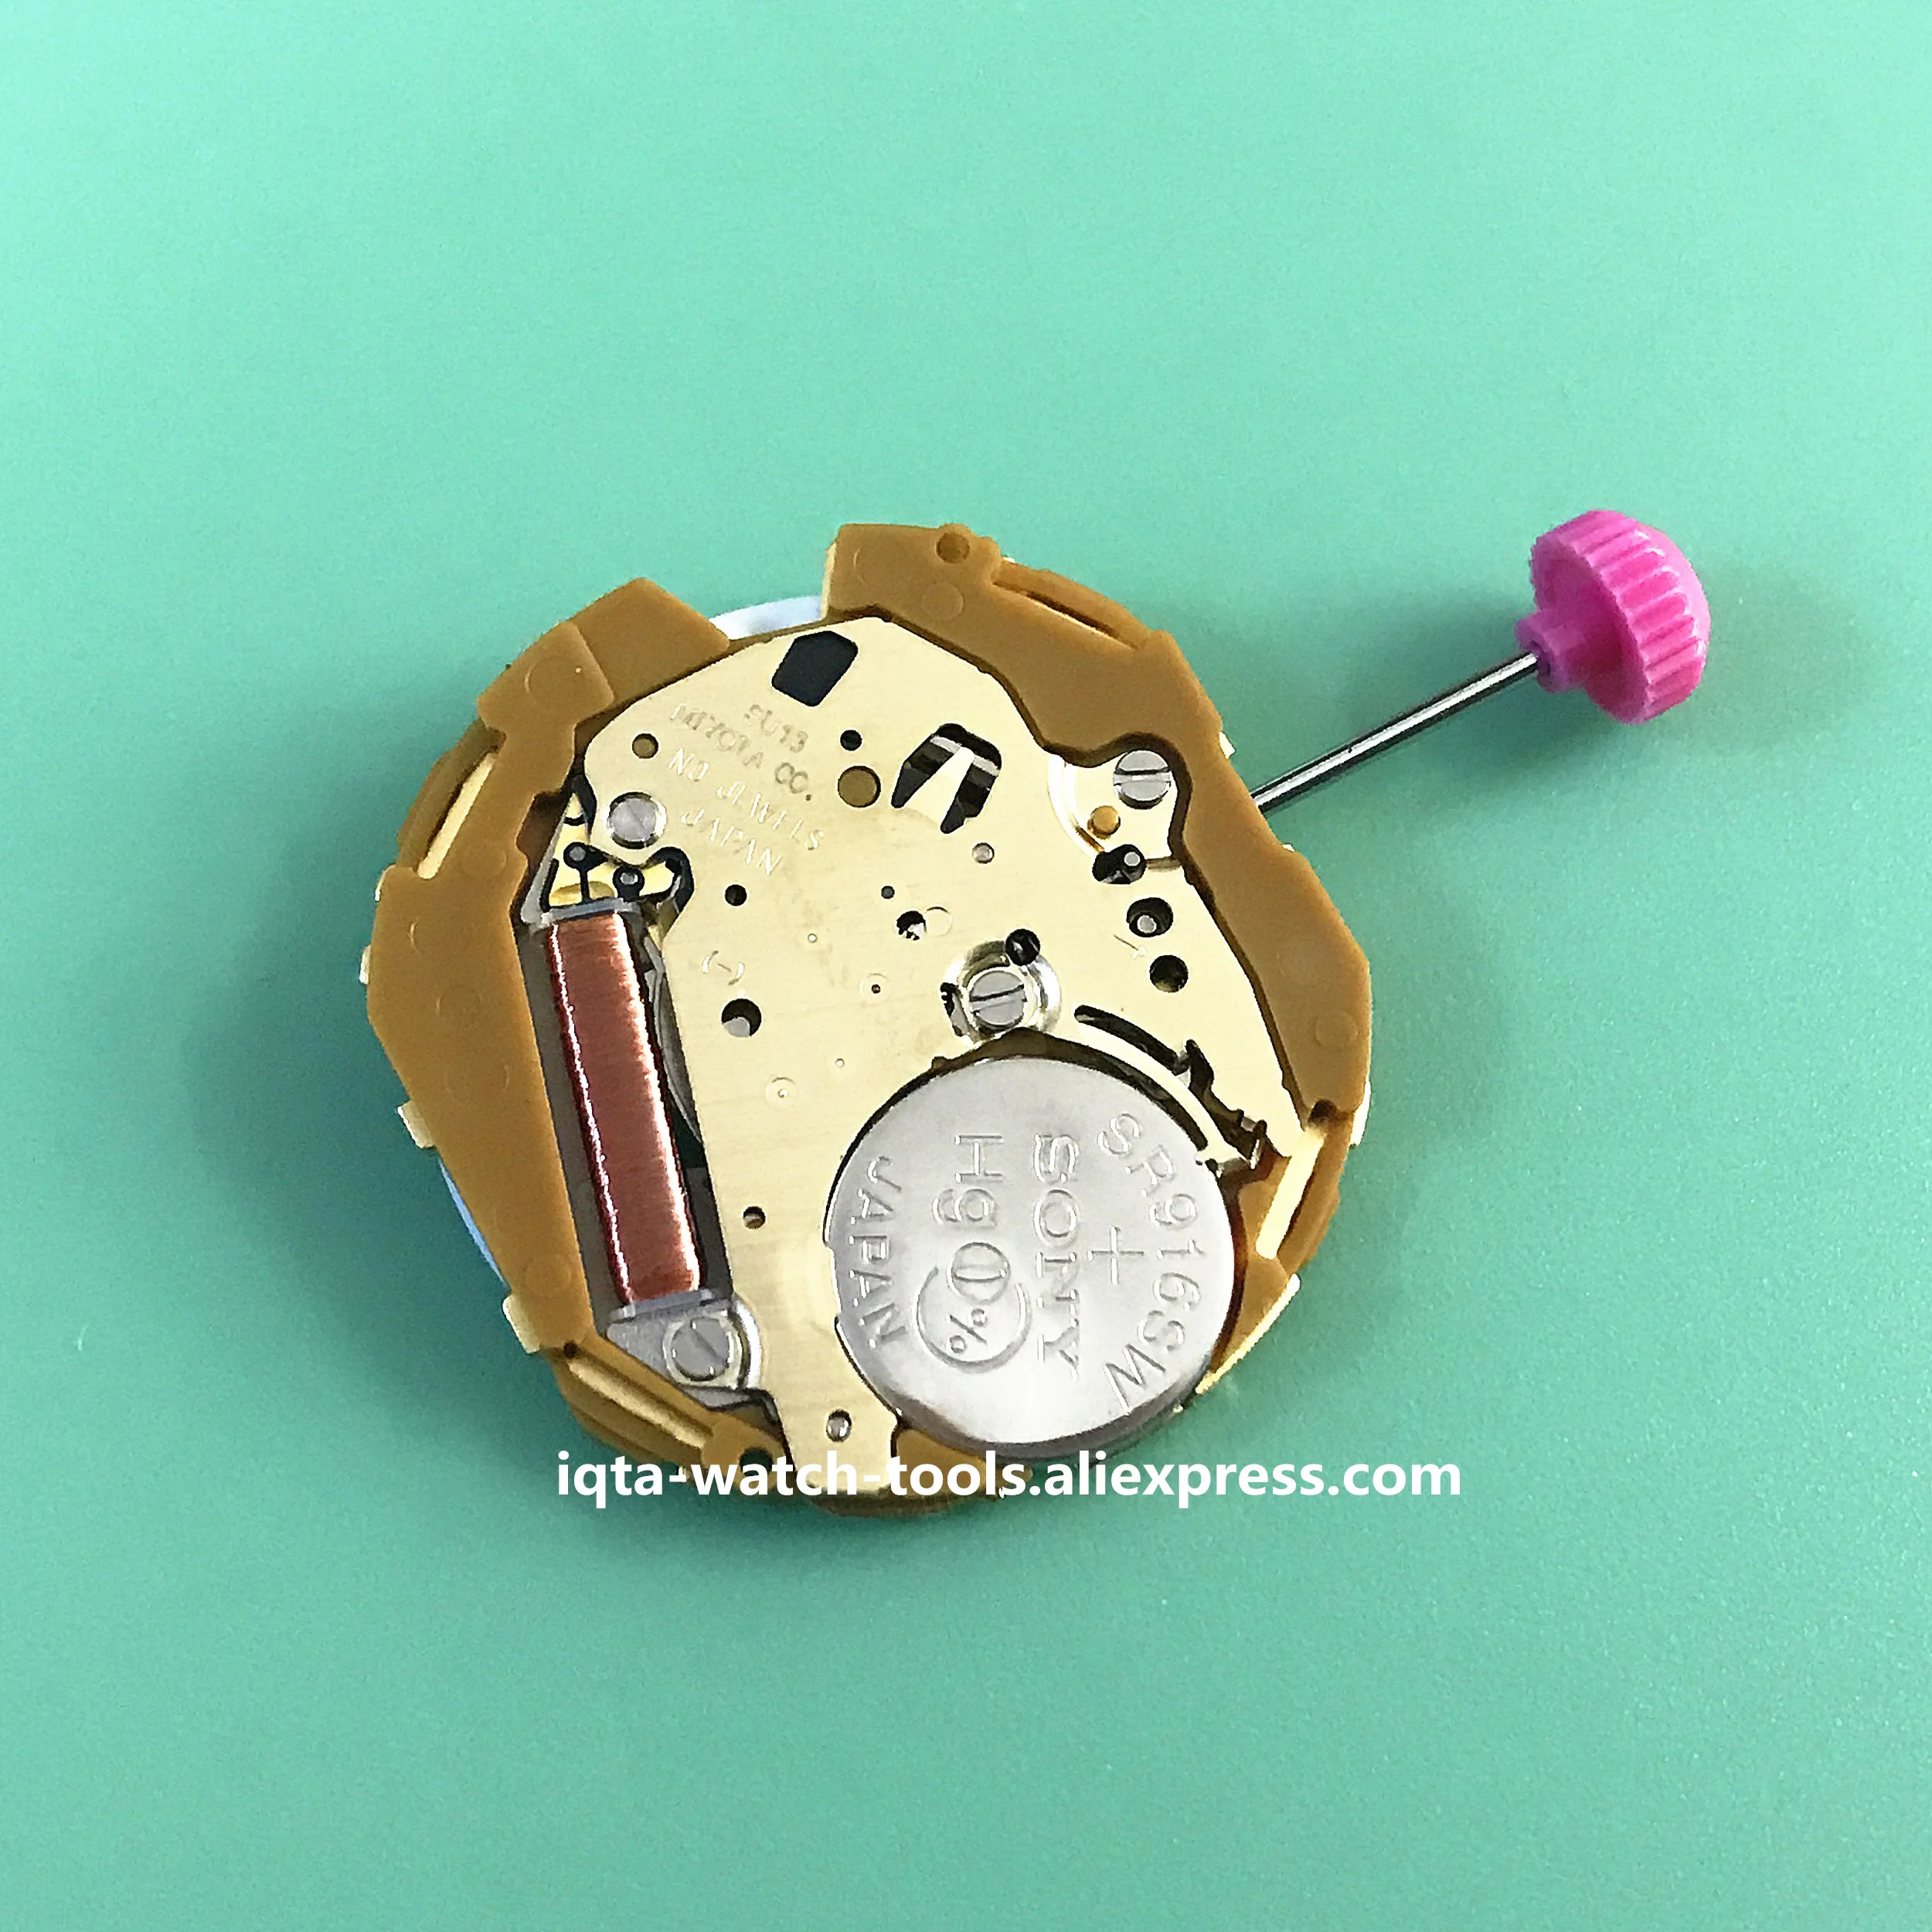 Free Shipping NEW Japan Miyota 9U13 Quartz Watch Movement Date at 3 6 Without battery Replace Repair | Наручные часы